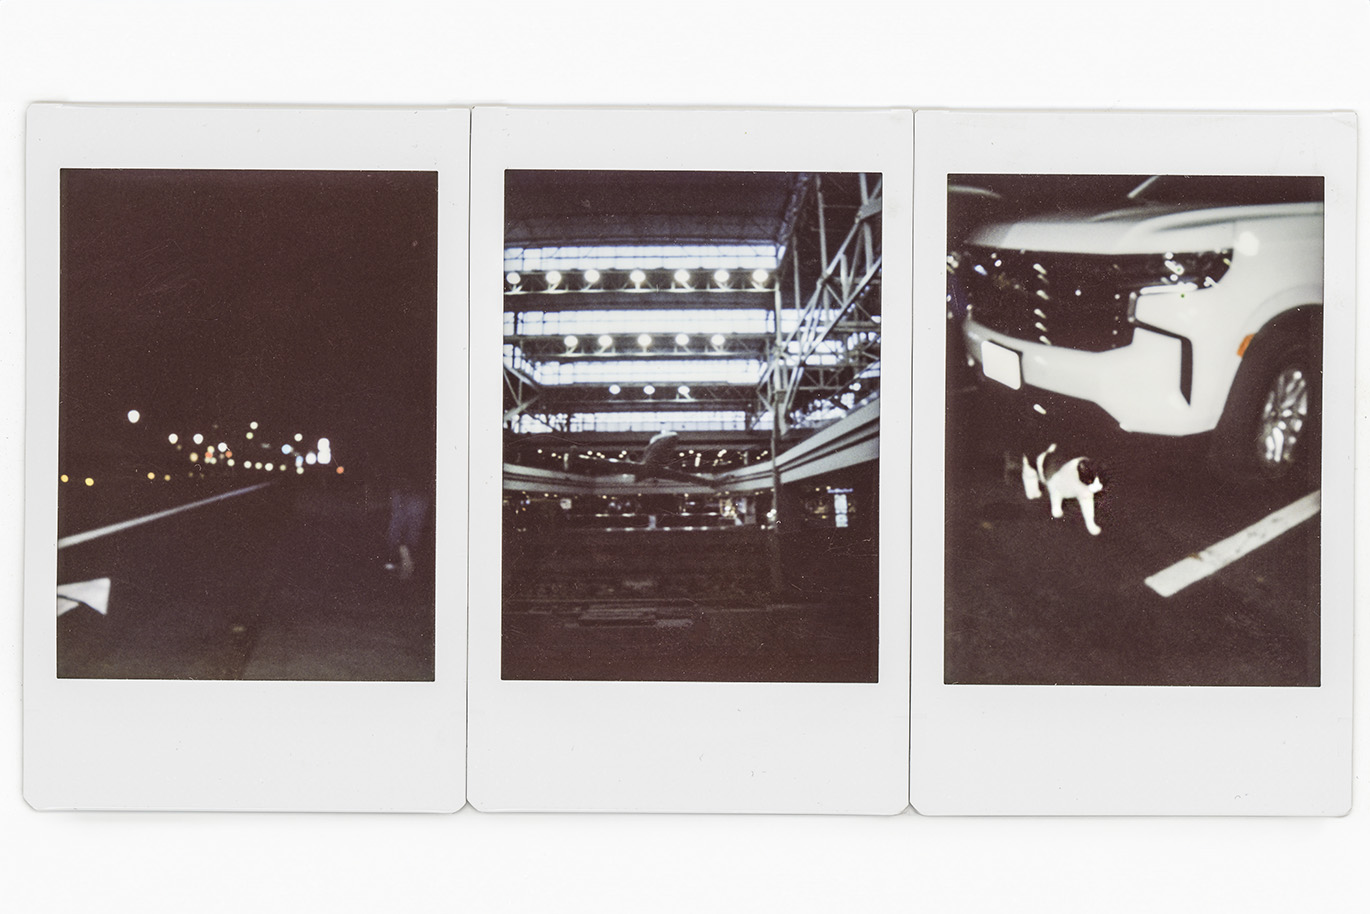 Set of three scanned polaroid photos showing images taken at night of a road, an airplane and a cat.